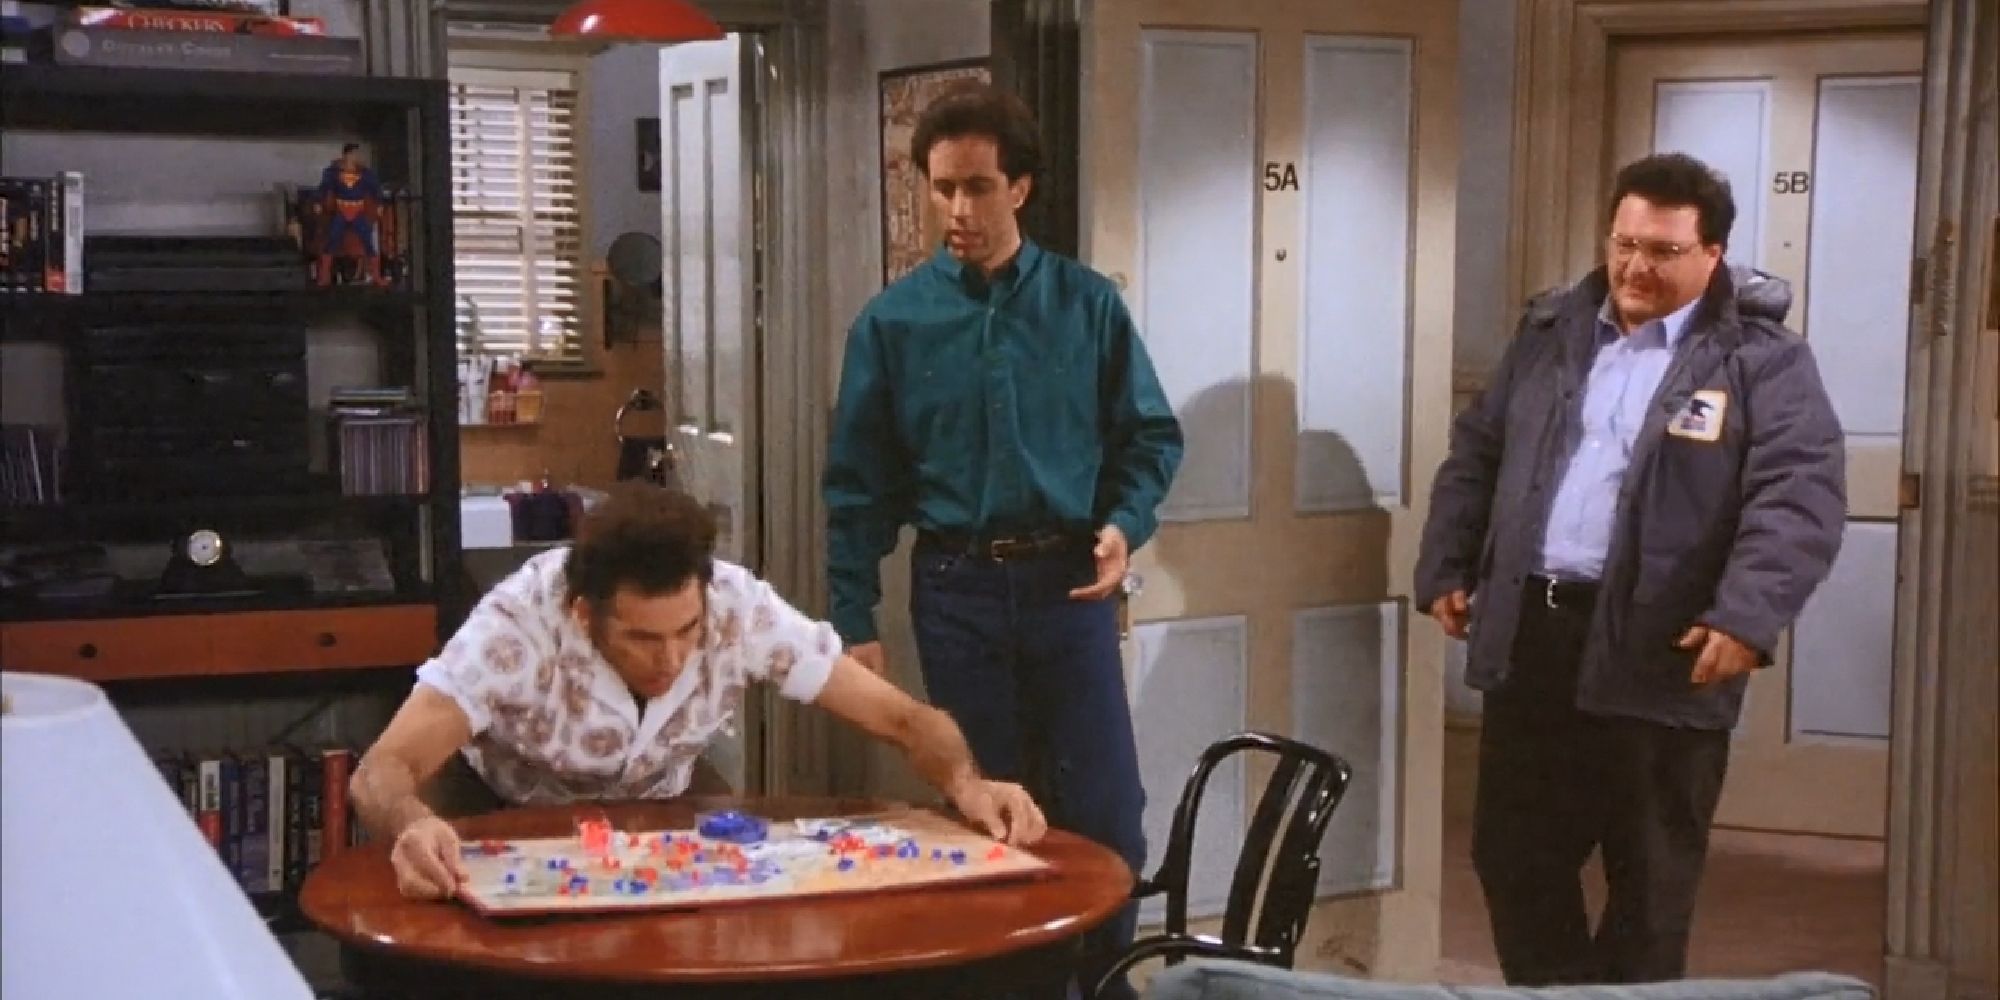 Kramer placing a game of Risk on a table in Jerry's apartment while Newman watches